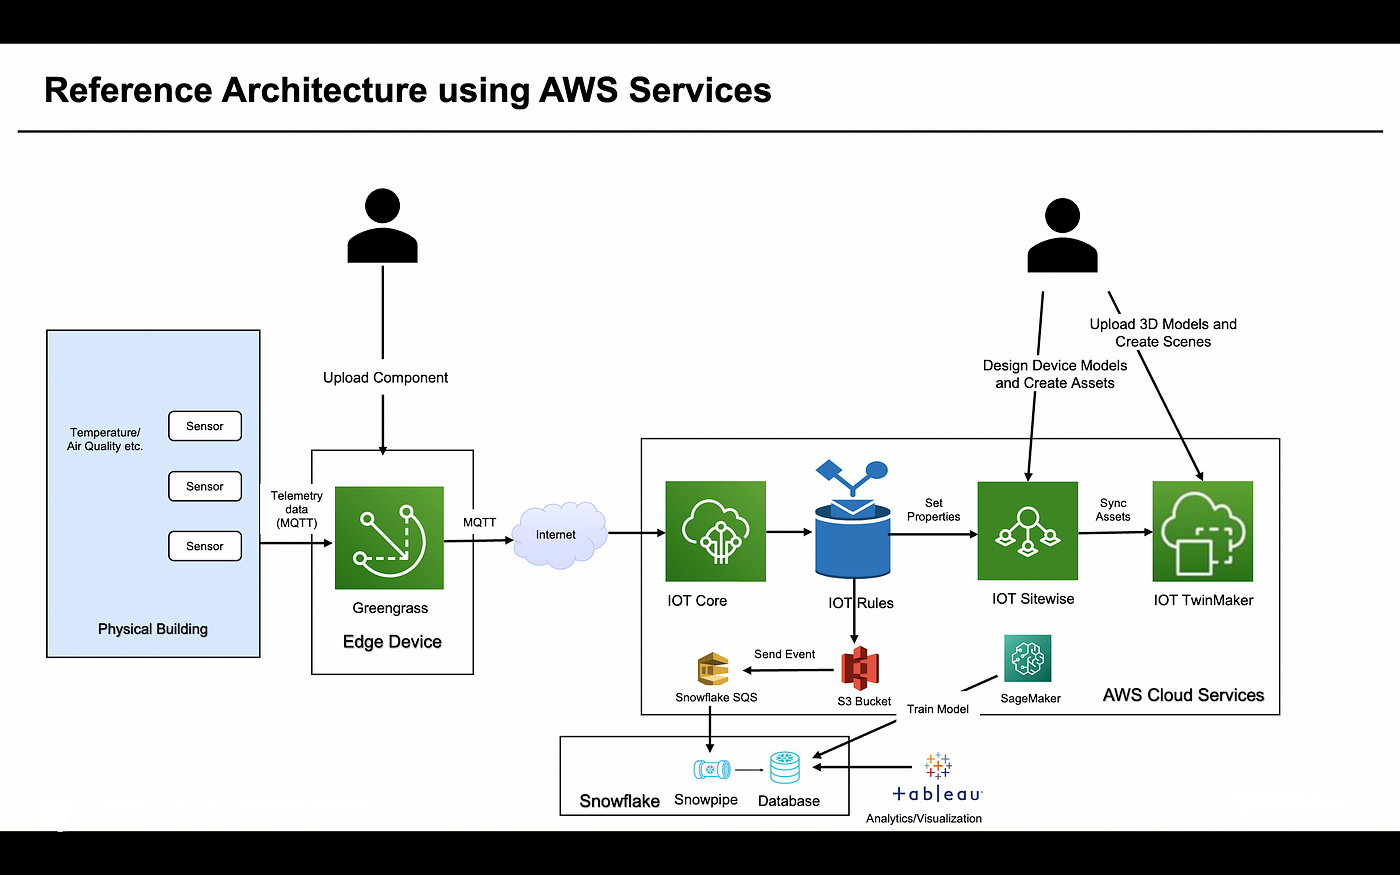 Figure 1 – Reference Architecture using AWS